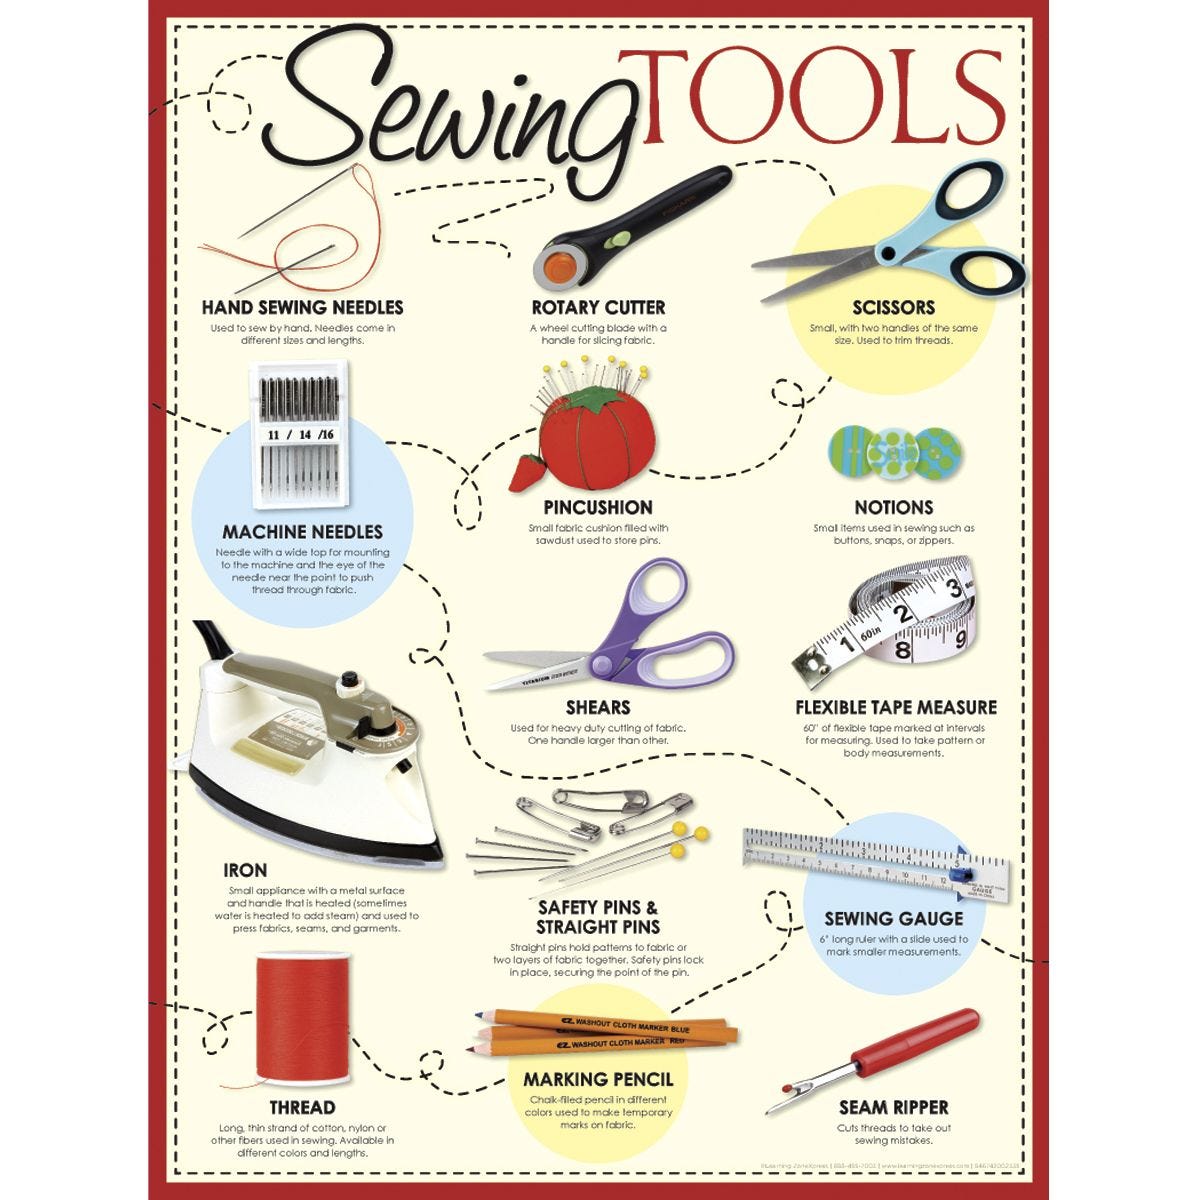 sew a needle pulling thread  Sewing quotes, Sewing rooms, Trendy sewing